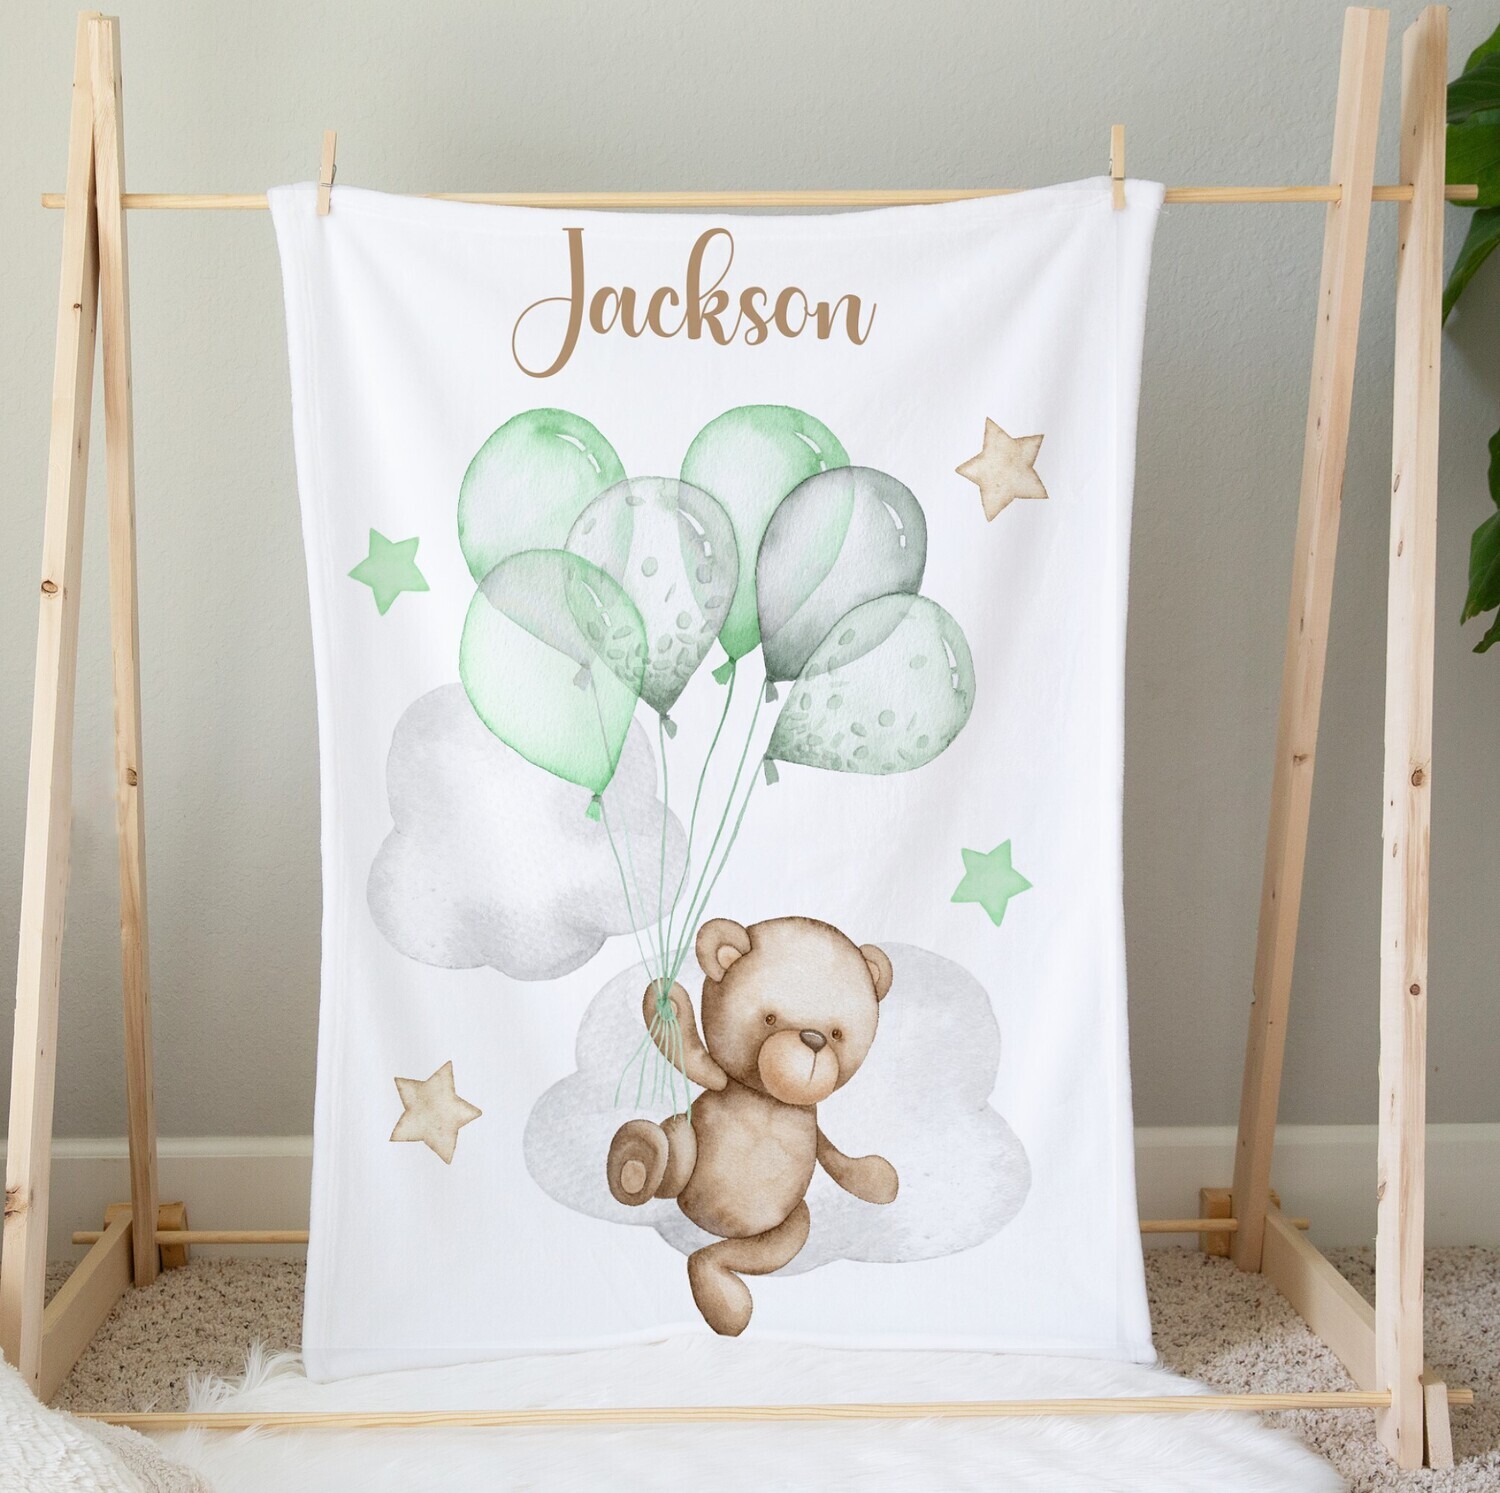 Personalized Baby Boy Blanket Teddy Bear Balloons Blanket Kids Bedroom Tummy Time Baby Shower Gift